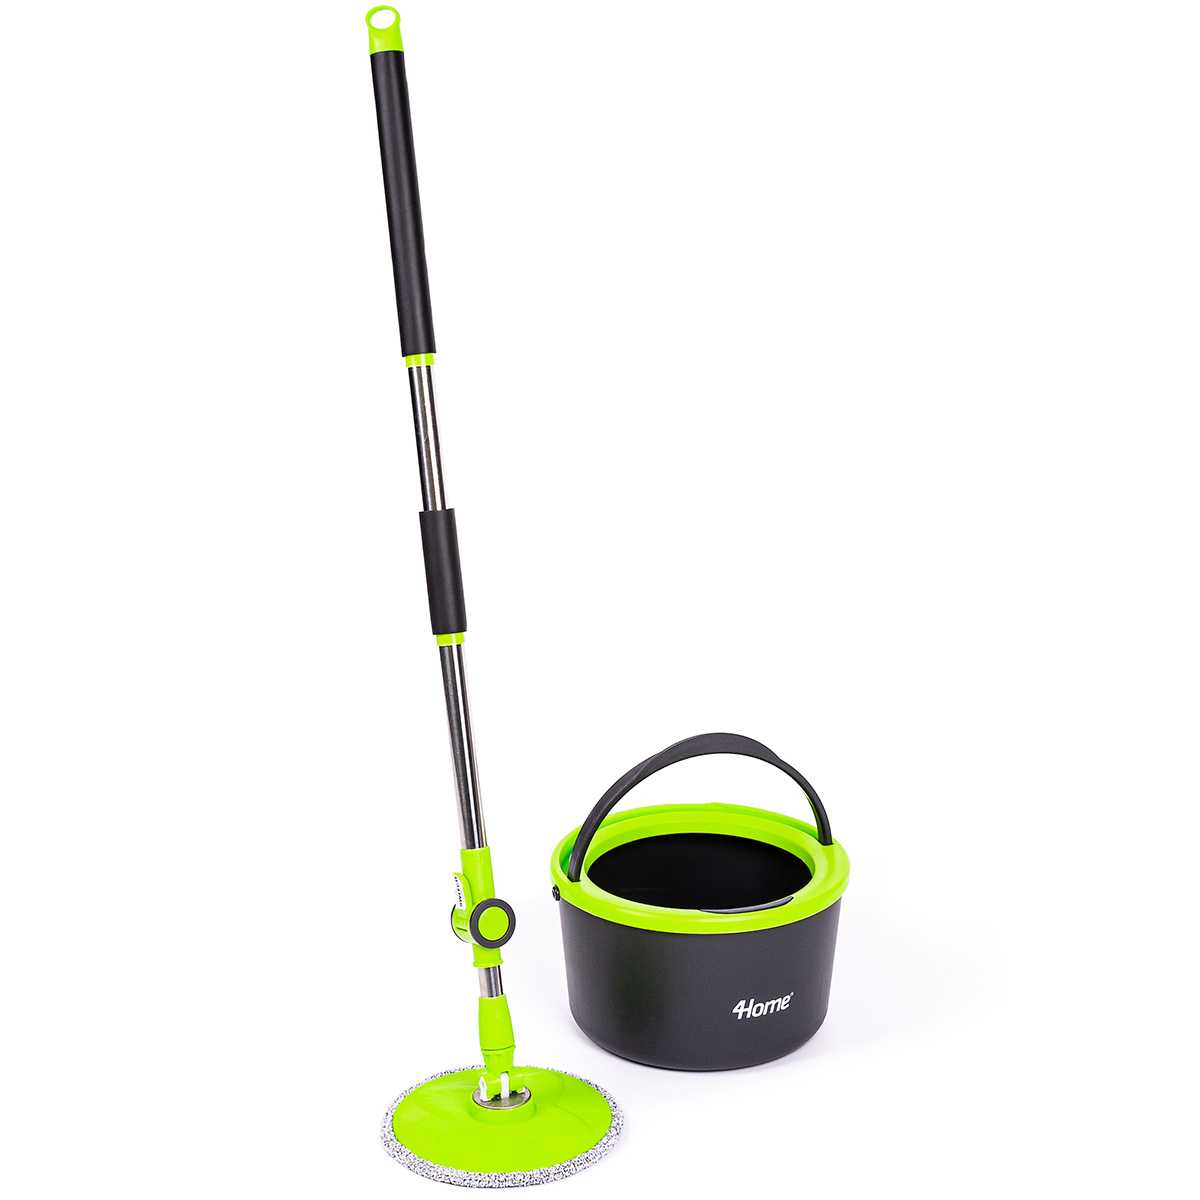 4Home Rapid Clean Compact Spin mop 4Home